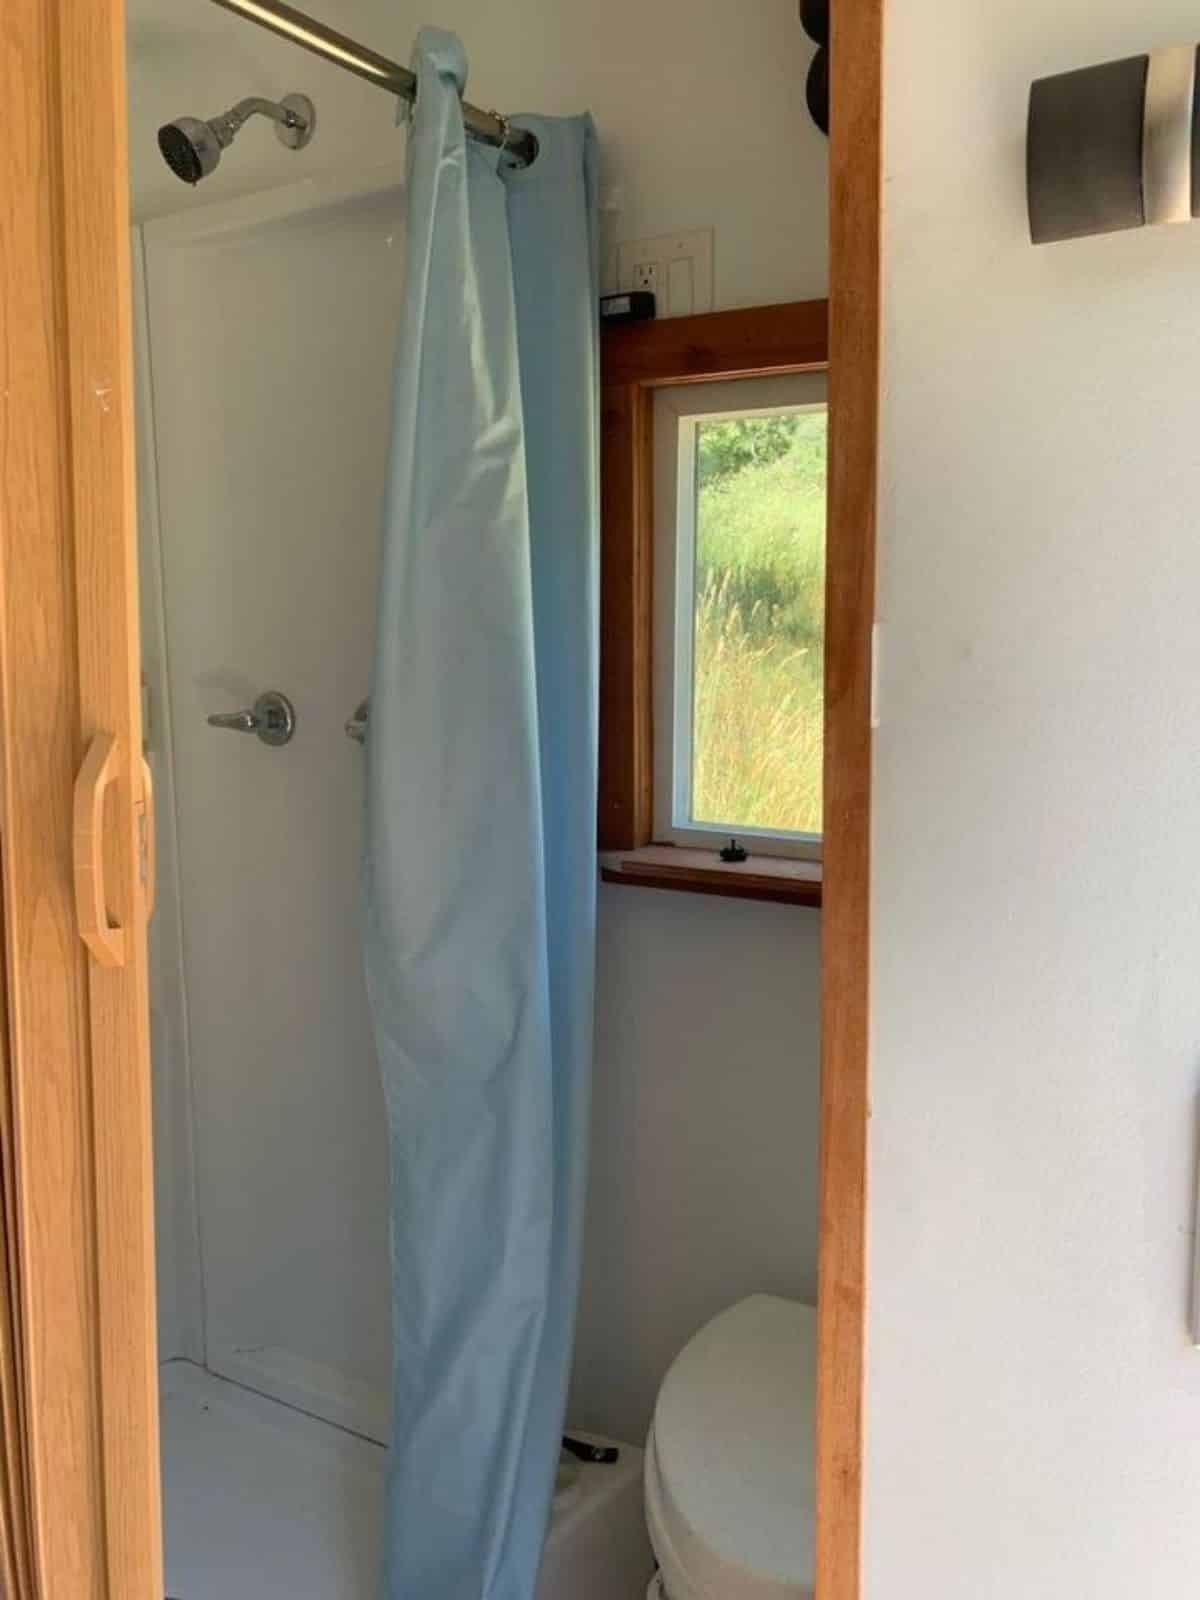 bathroom of 22' Modern Tiny House has all the standard fittings